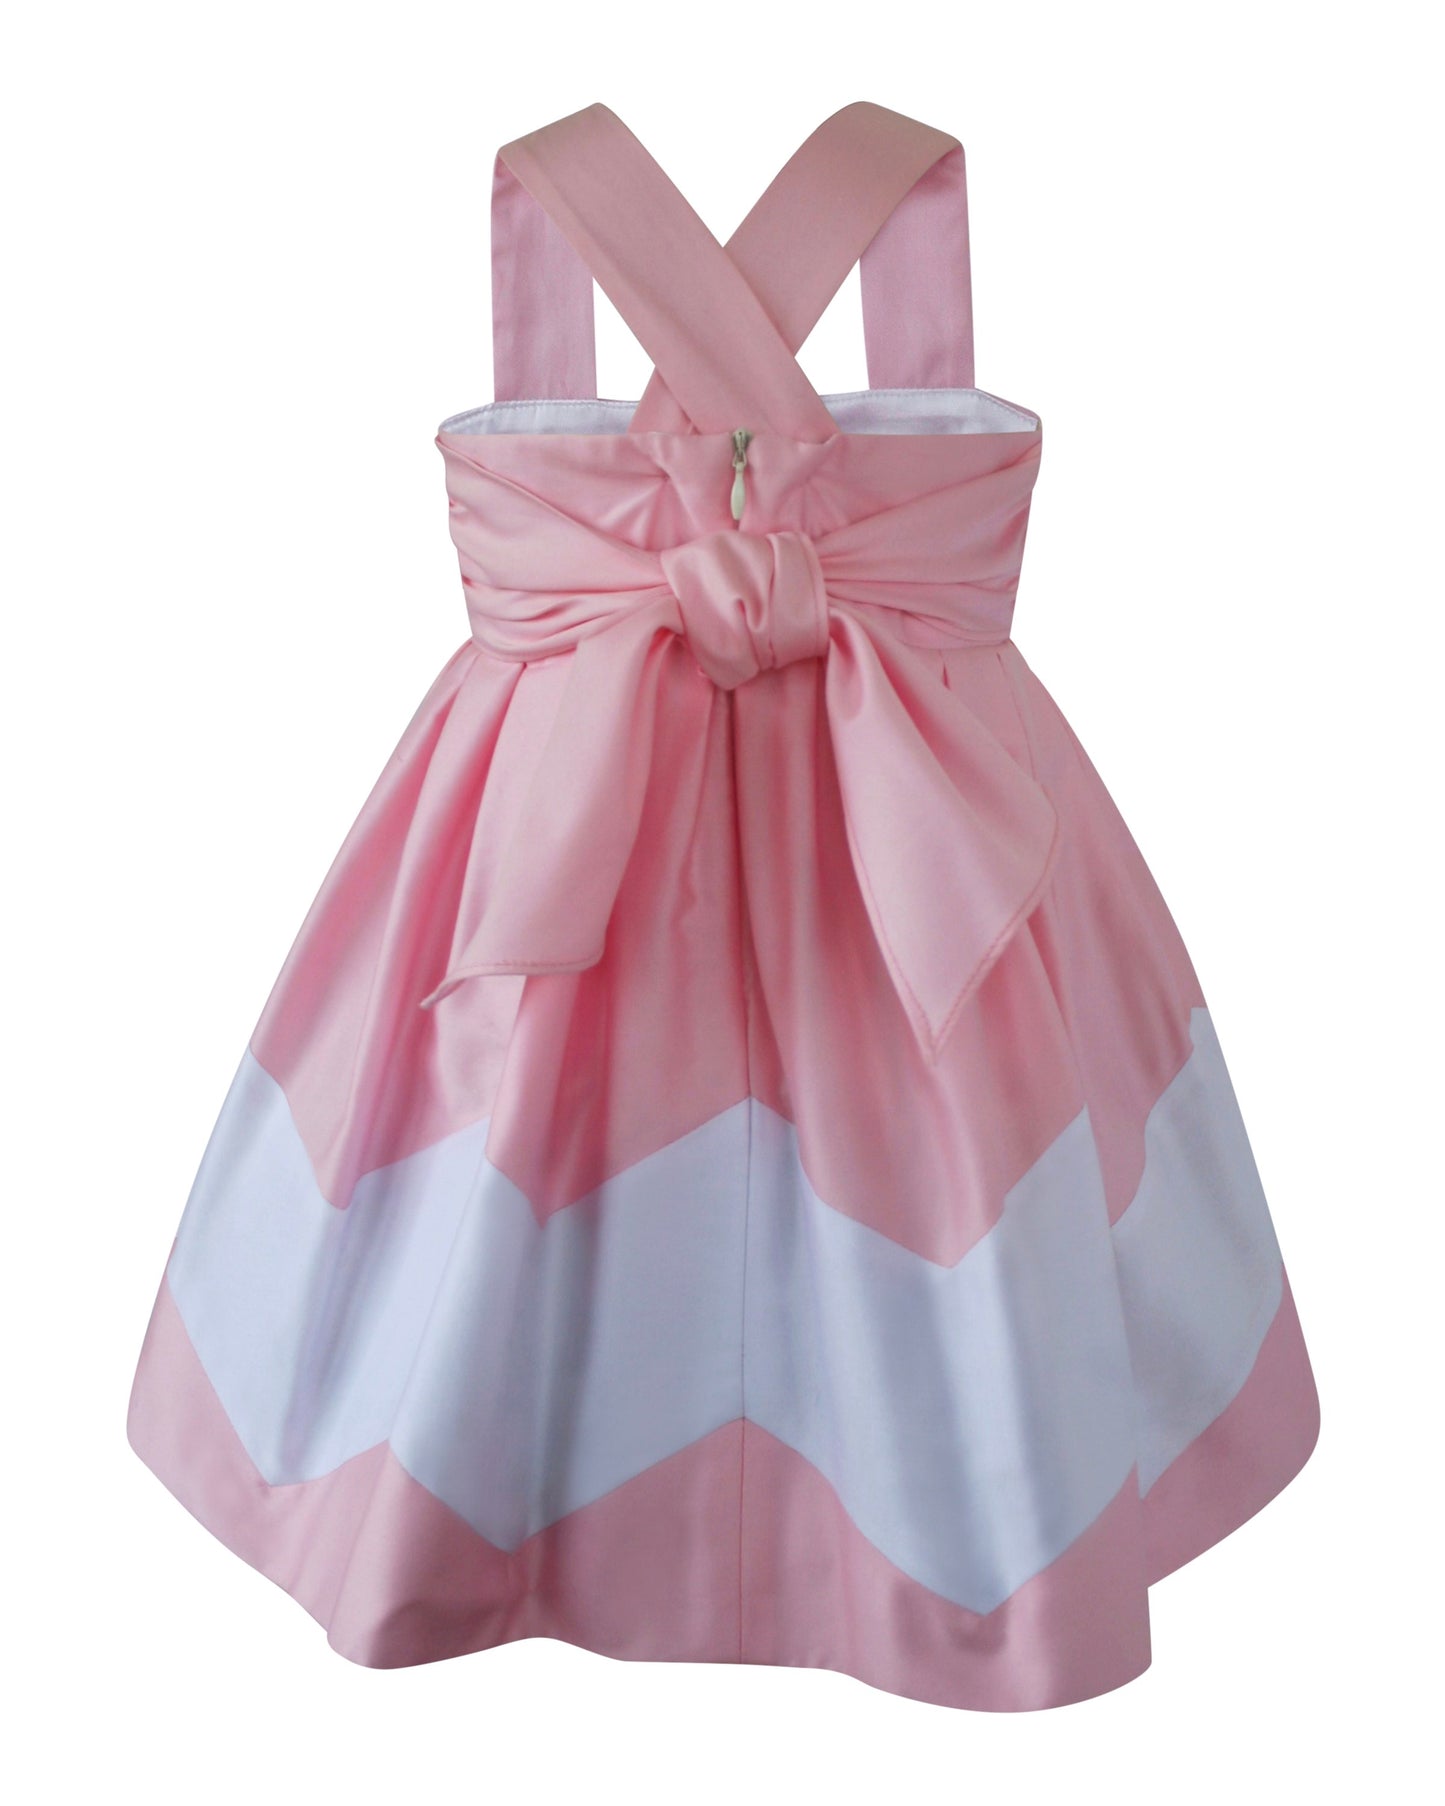 Helena and Harry Girl's Pink and White Chevron Sundress